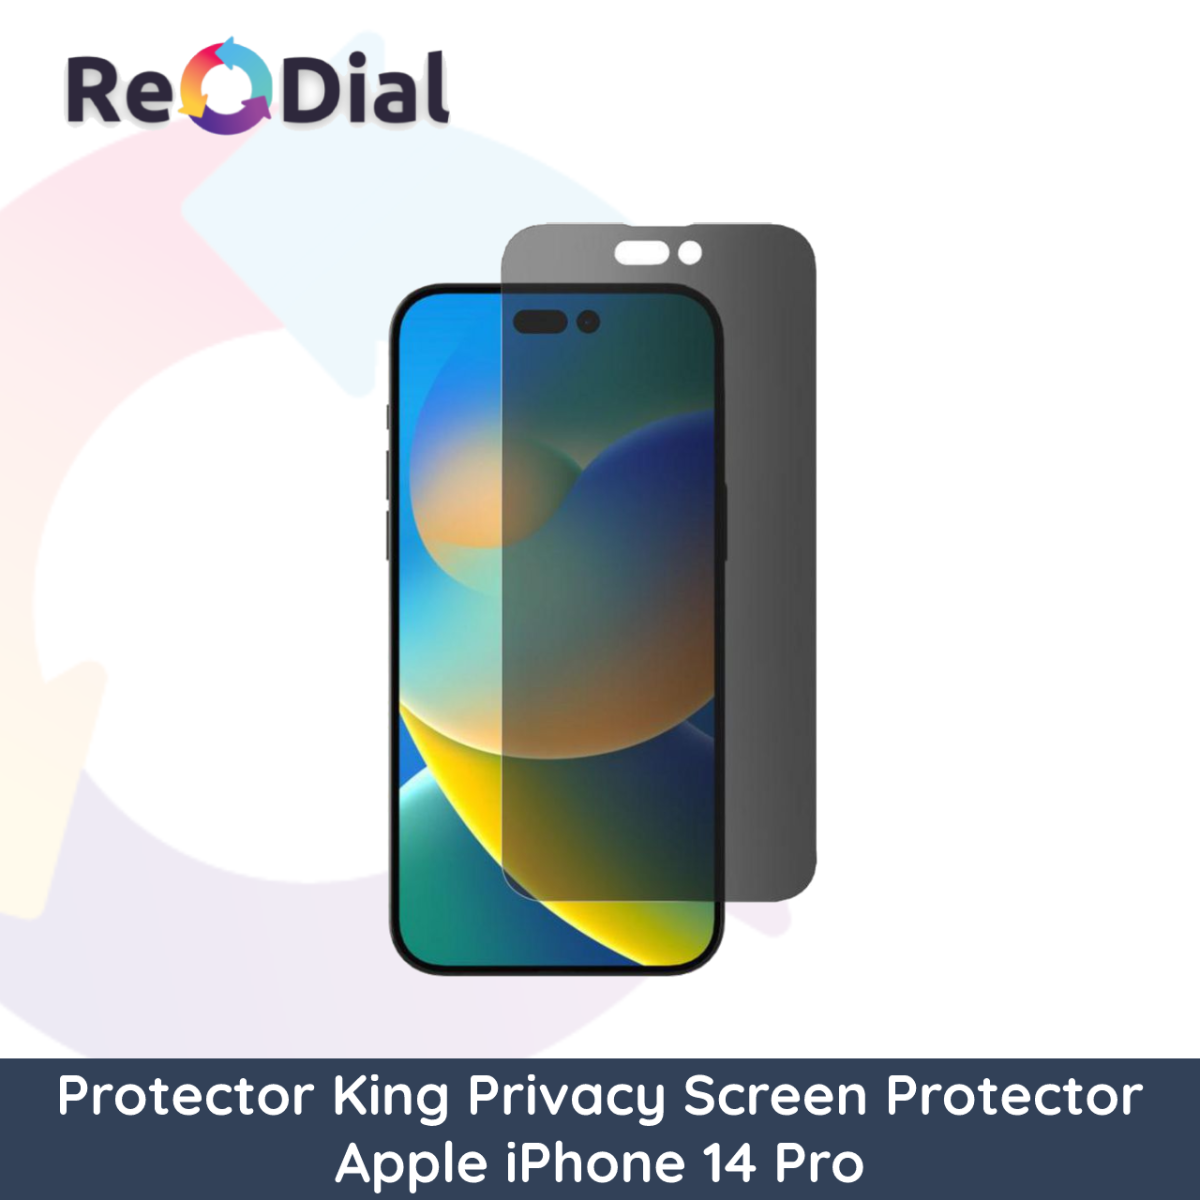 Protector King Privacy Glass Screen Protector for Apple iPhone 14 Pro